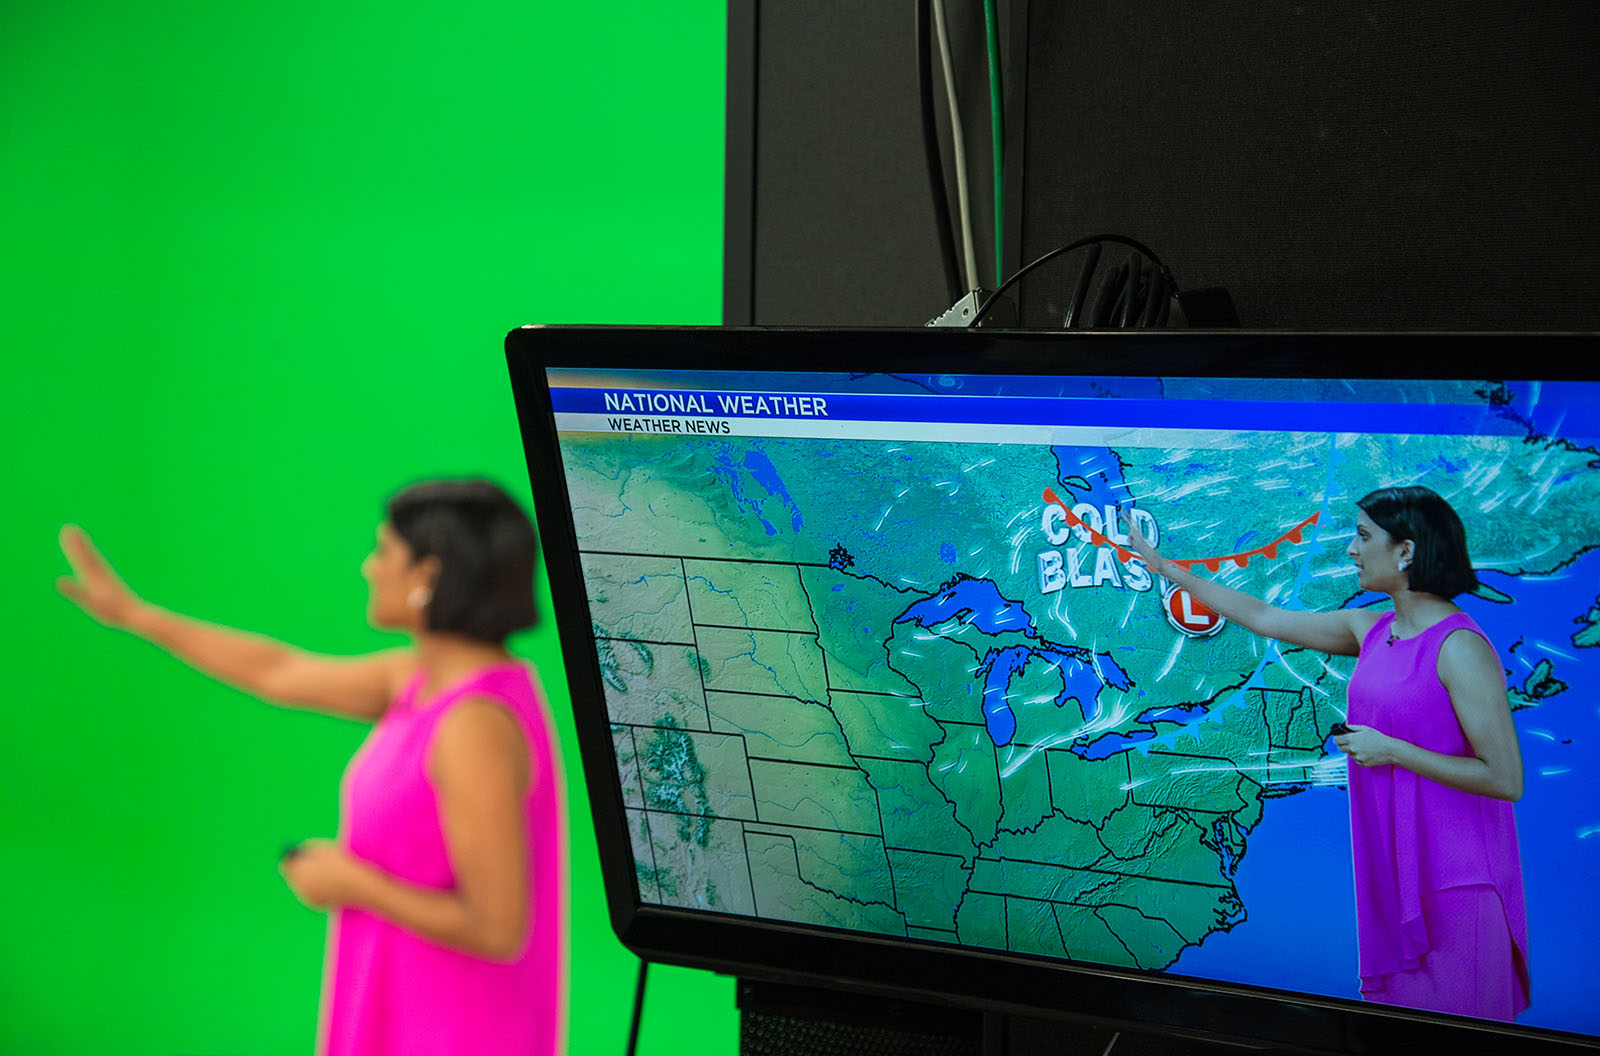 A meteorologist in front of a green screen.